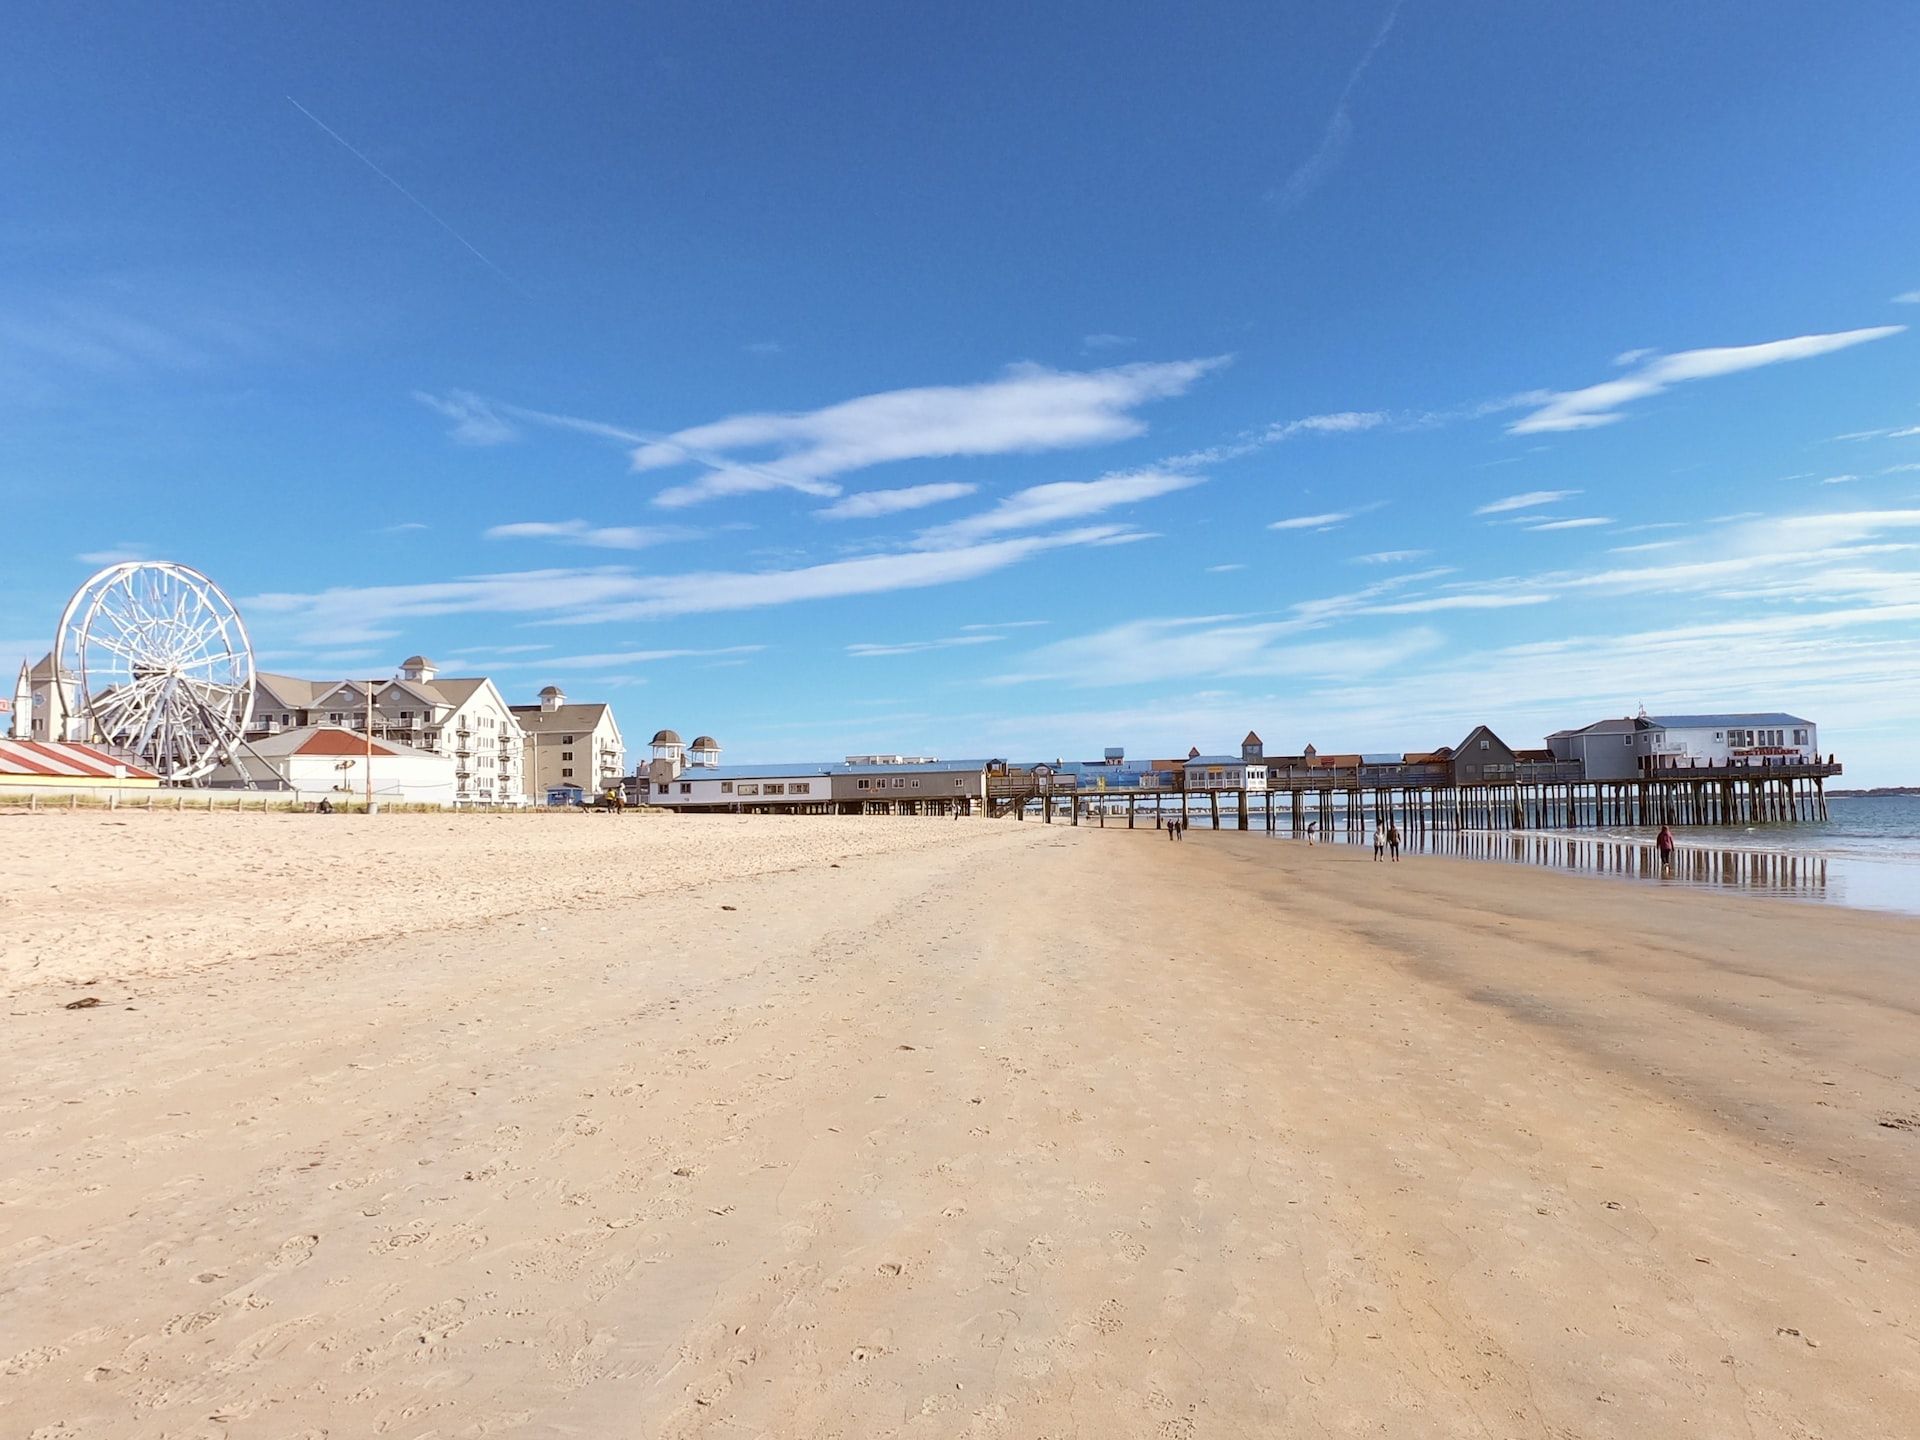 A view of Old Orchard Beach with the pier and the amusement park in the background